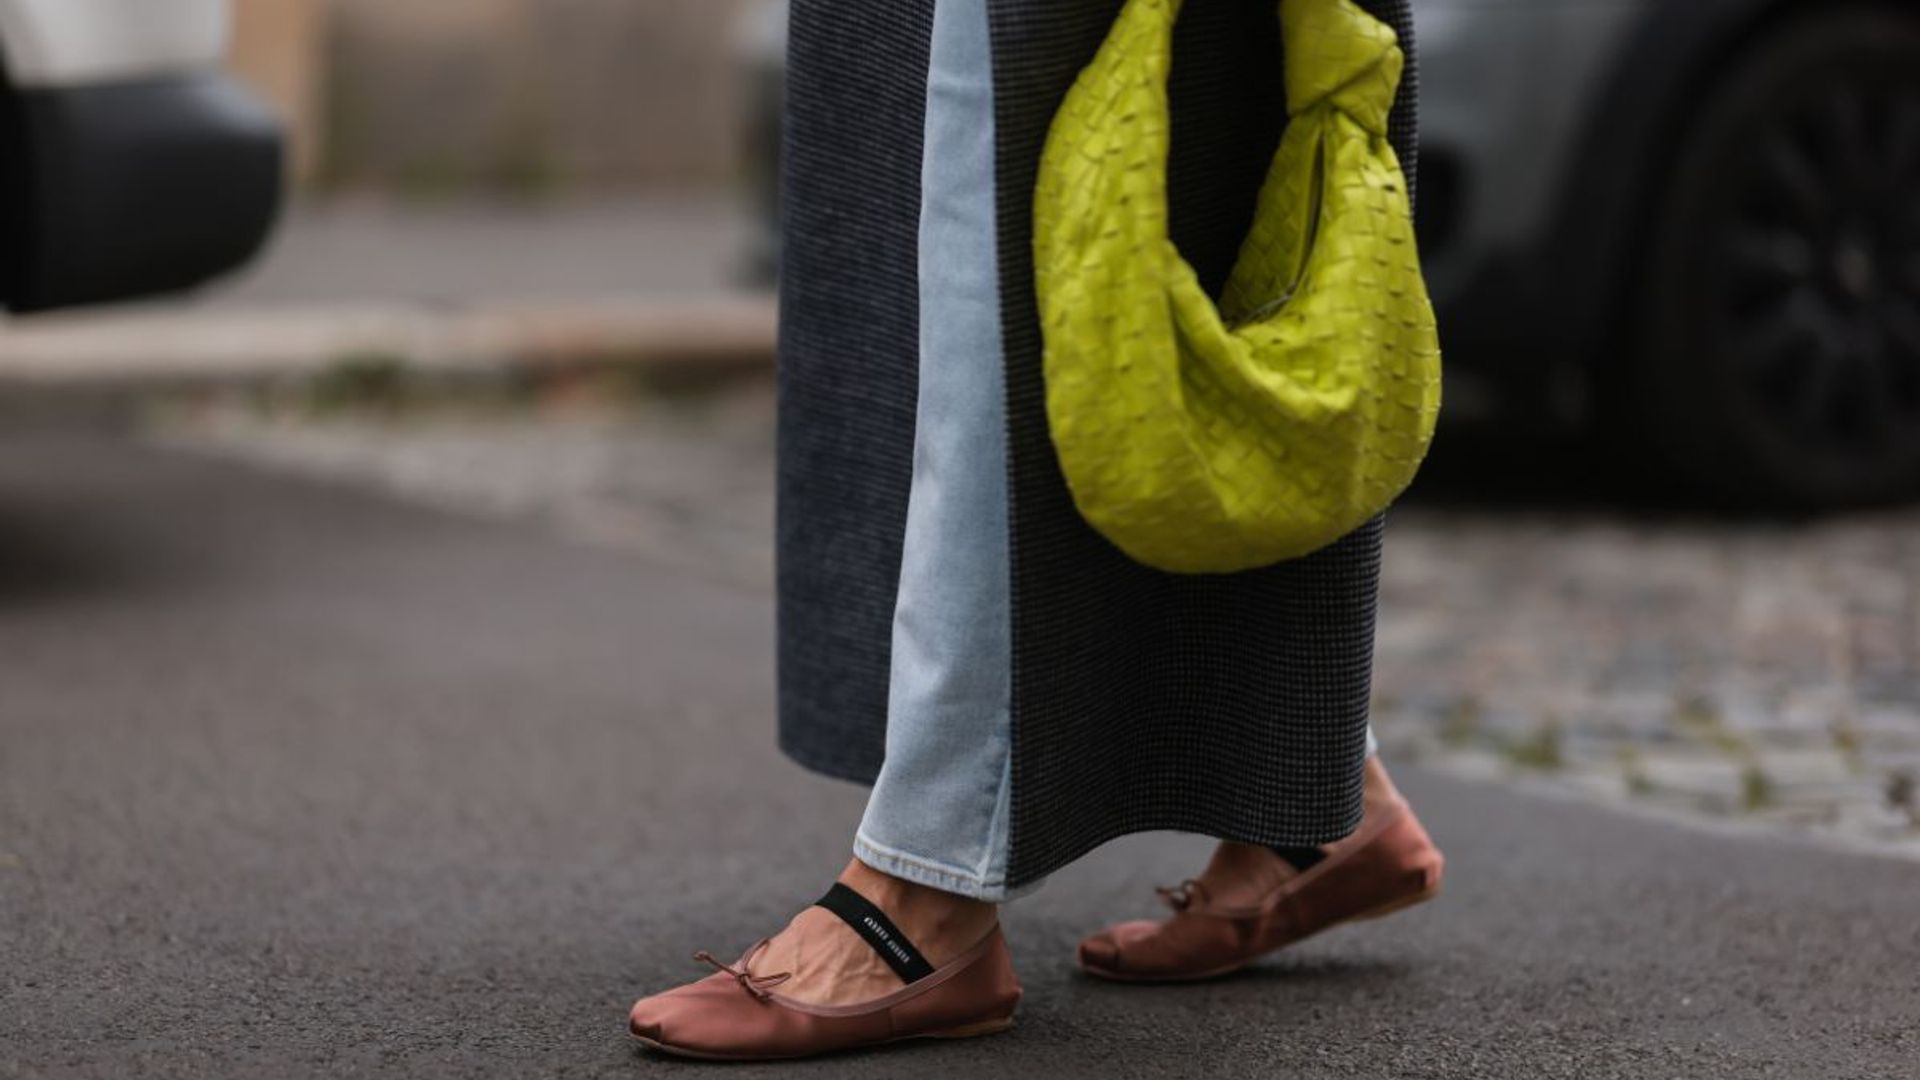 The Newest Street Style Trend: The Net Bag - The Garnette Report